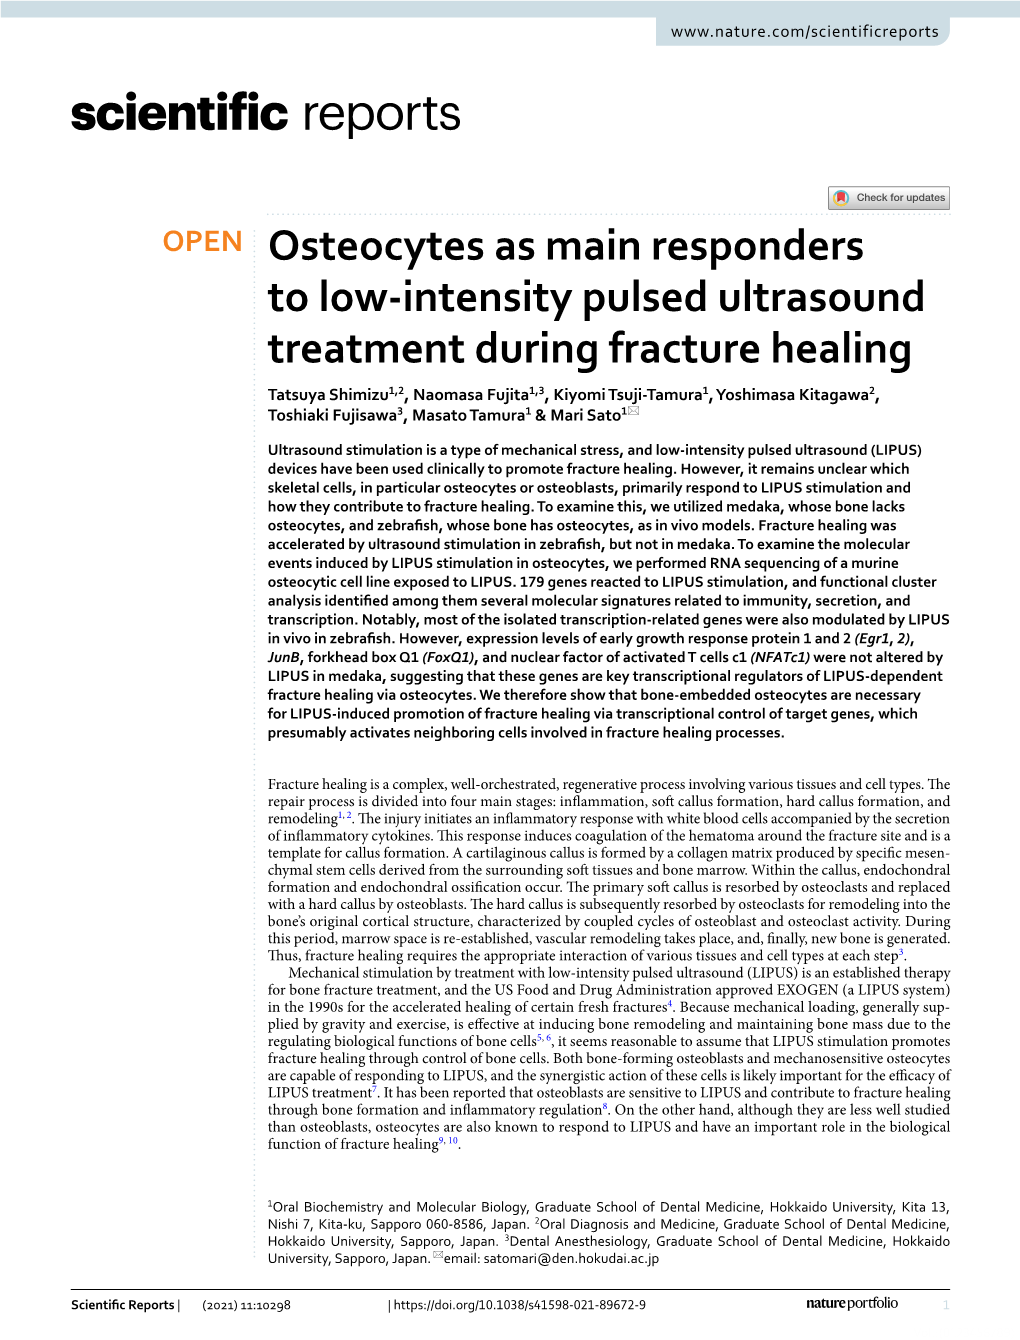 Osteocytes As Main Responders to Low-Intensity Pulsed Ultrasound